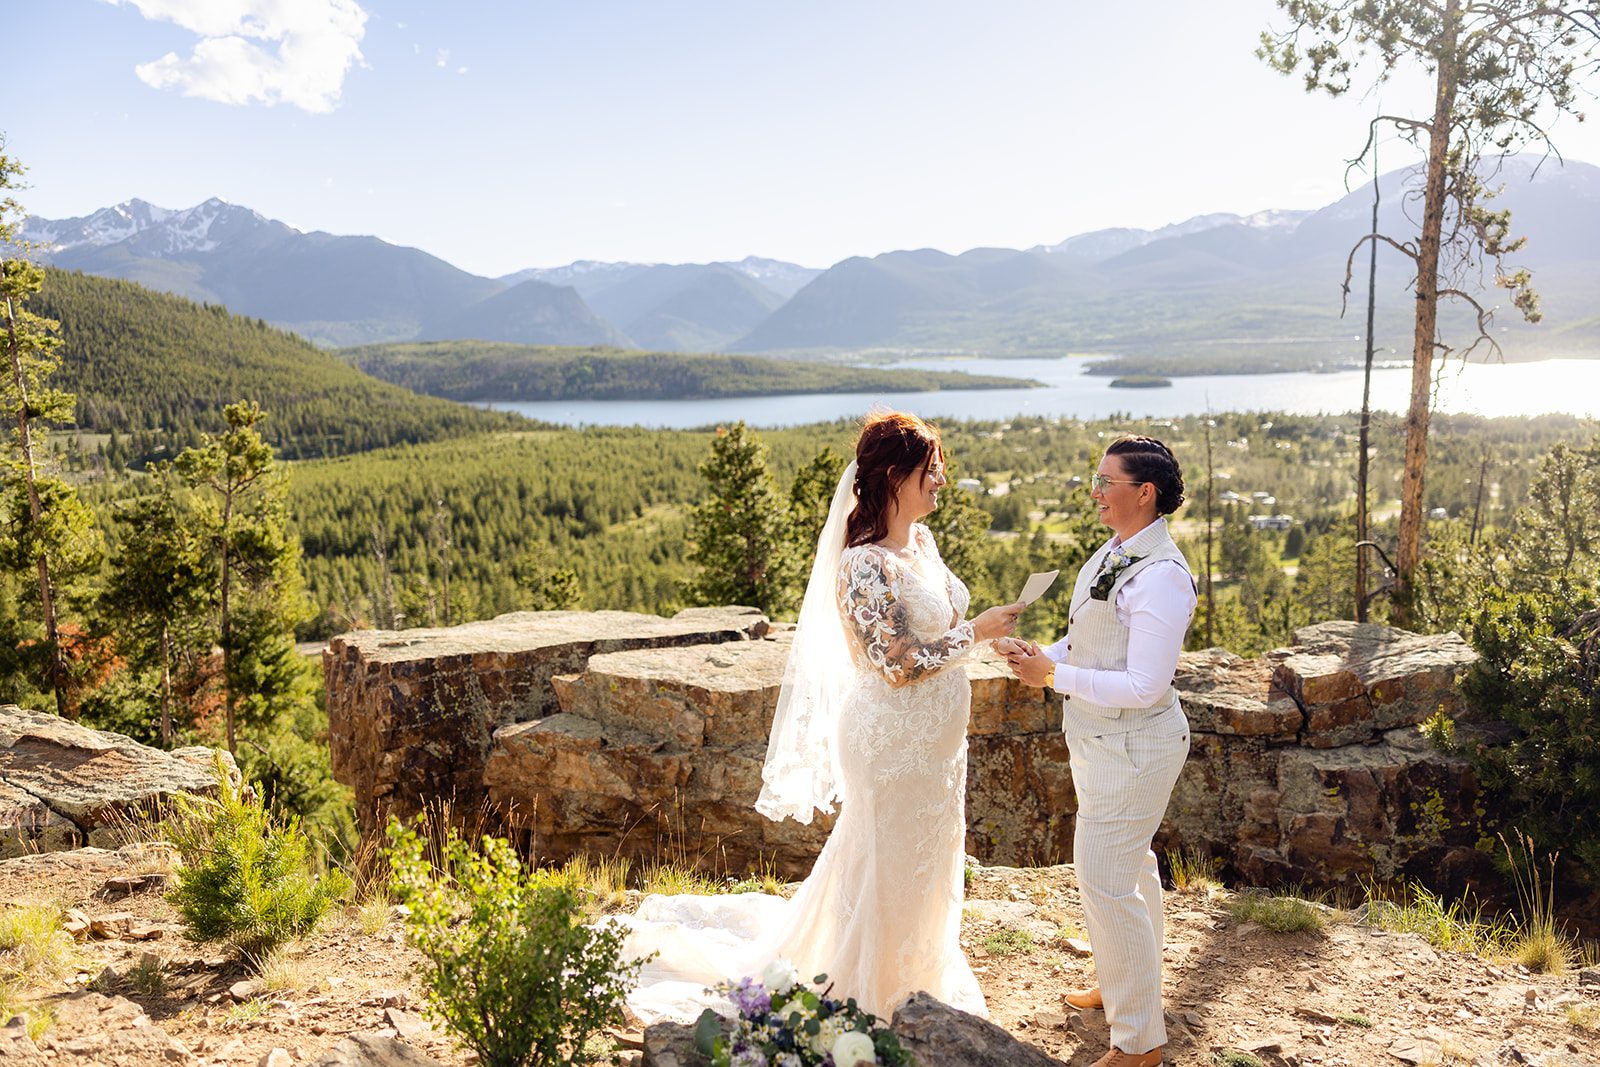 Reading vows at sunset  during Summit County Elopement